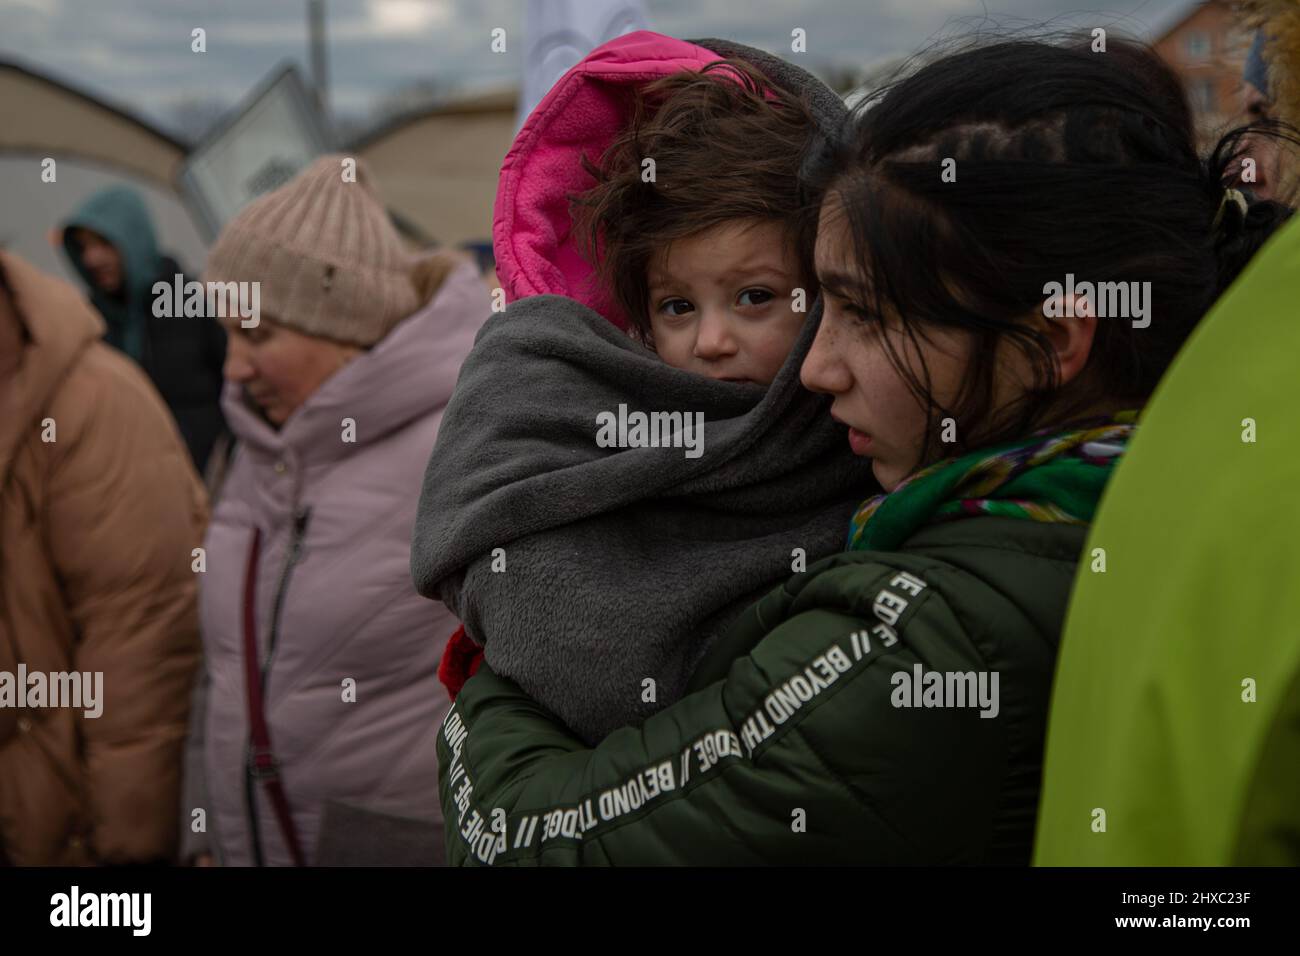 Ukrainian refugees arrive in Poland through the Medyka border.Thousands of Ukrainians arrive in Poland across the Medyka border fleeing the war. Since Russia's invasion of Ukraine began, more than 2 million people have fled for refuge, the vast majority of them women and children. (Photo by Fer Capdepon Arroyo/Pacific Press) Stock Photo